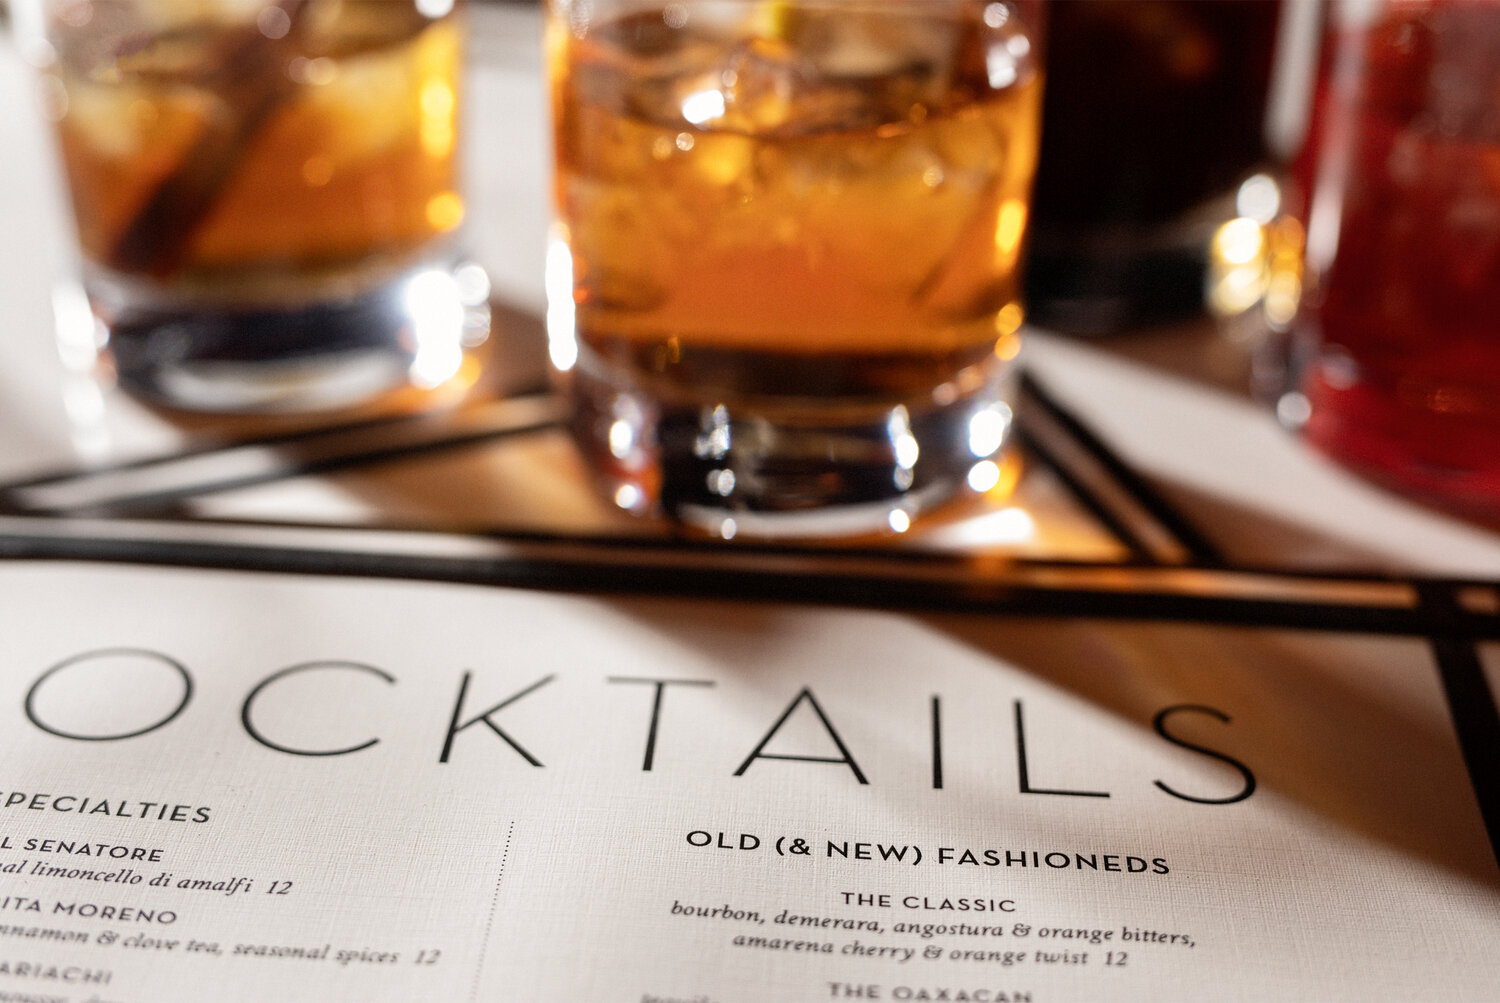 Each libation on the menu is developed with care